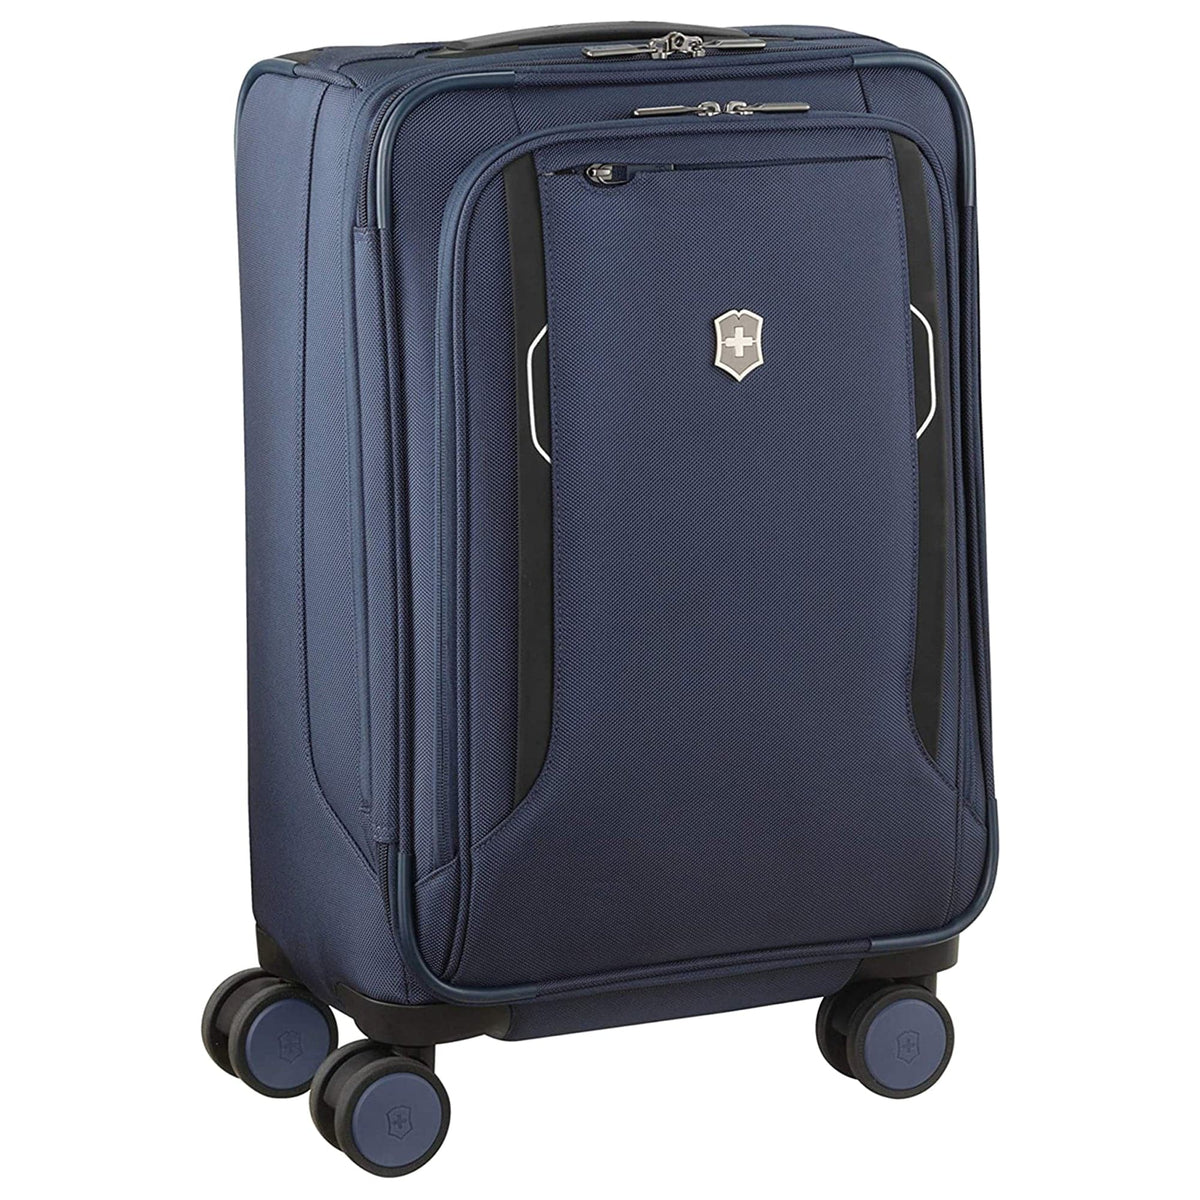 Victorinox Werks Traveler 6.0 Frequent Flyer Softside Carry-On Luggage